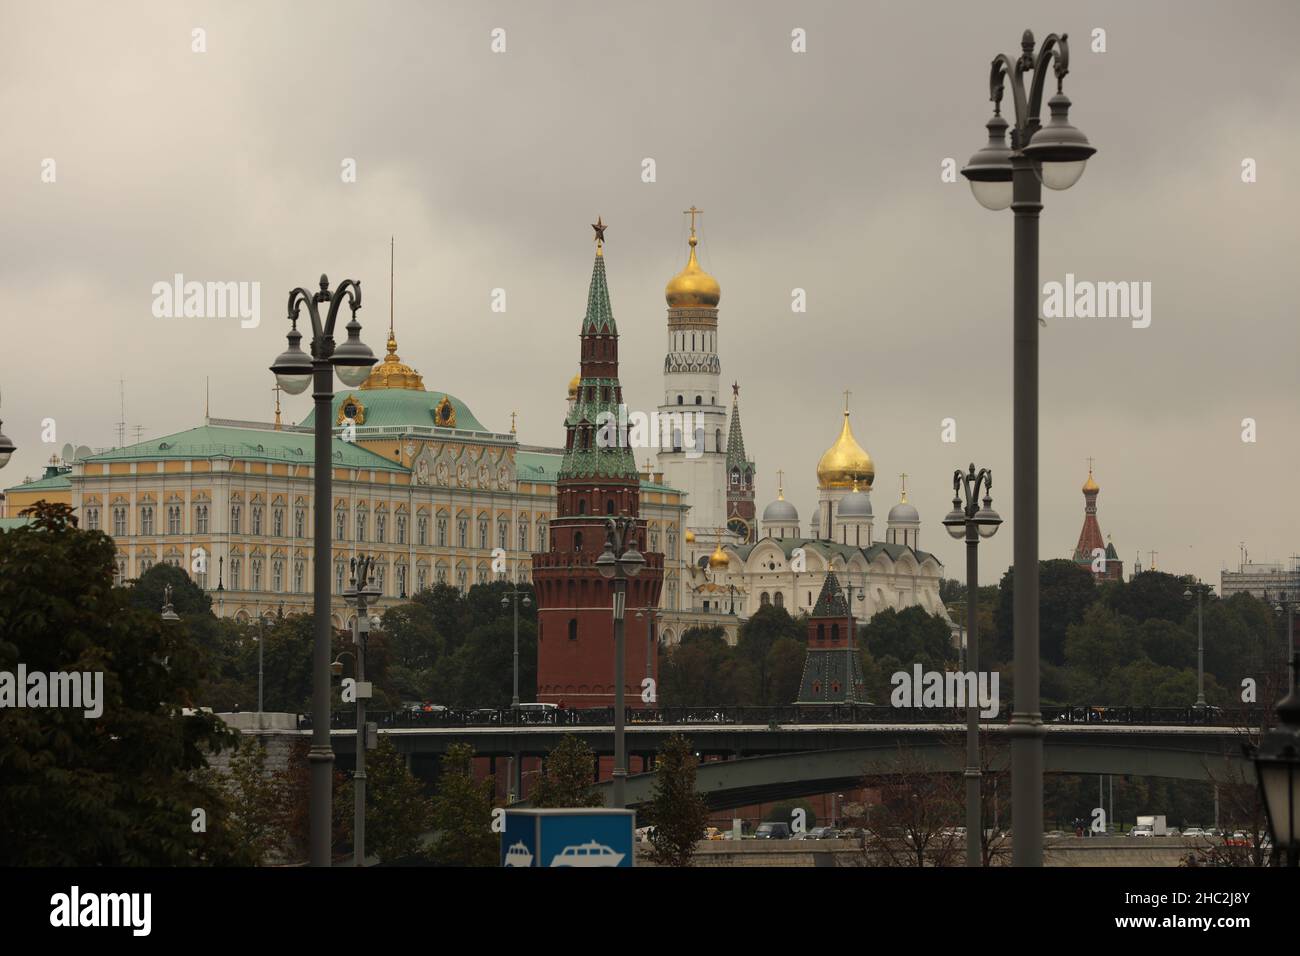 The fortified core of the historical Russian city, the central and most ancient part of it. Stock Photo